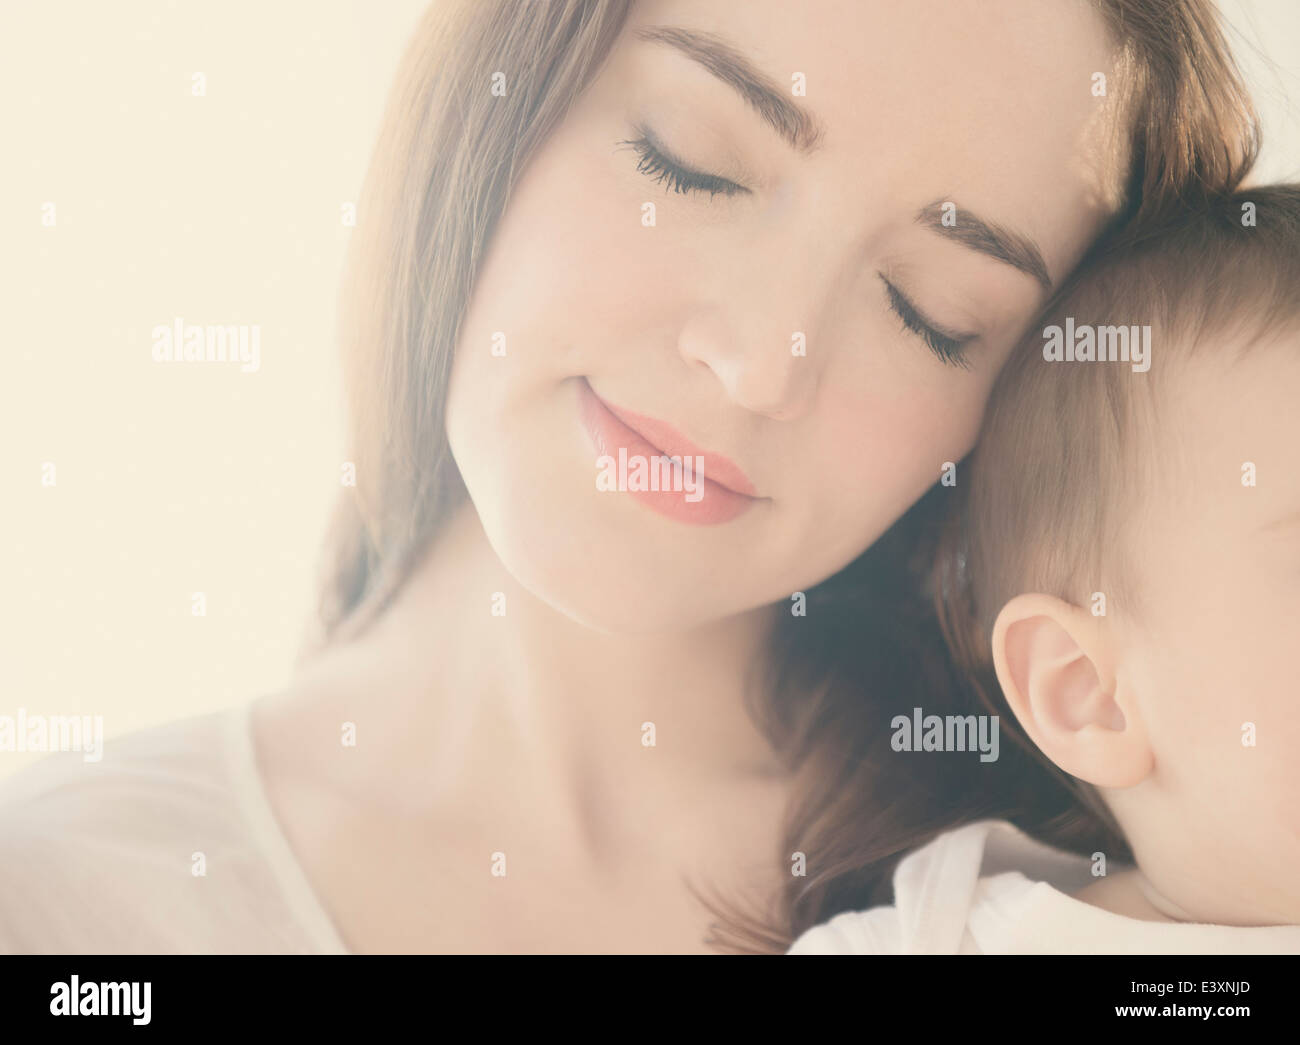 Smiling mother cradling baby Stock Photo